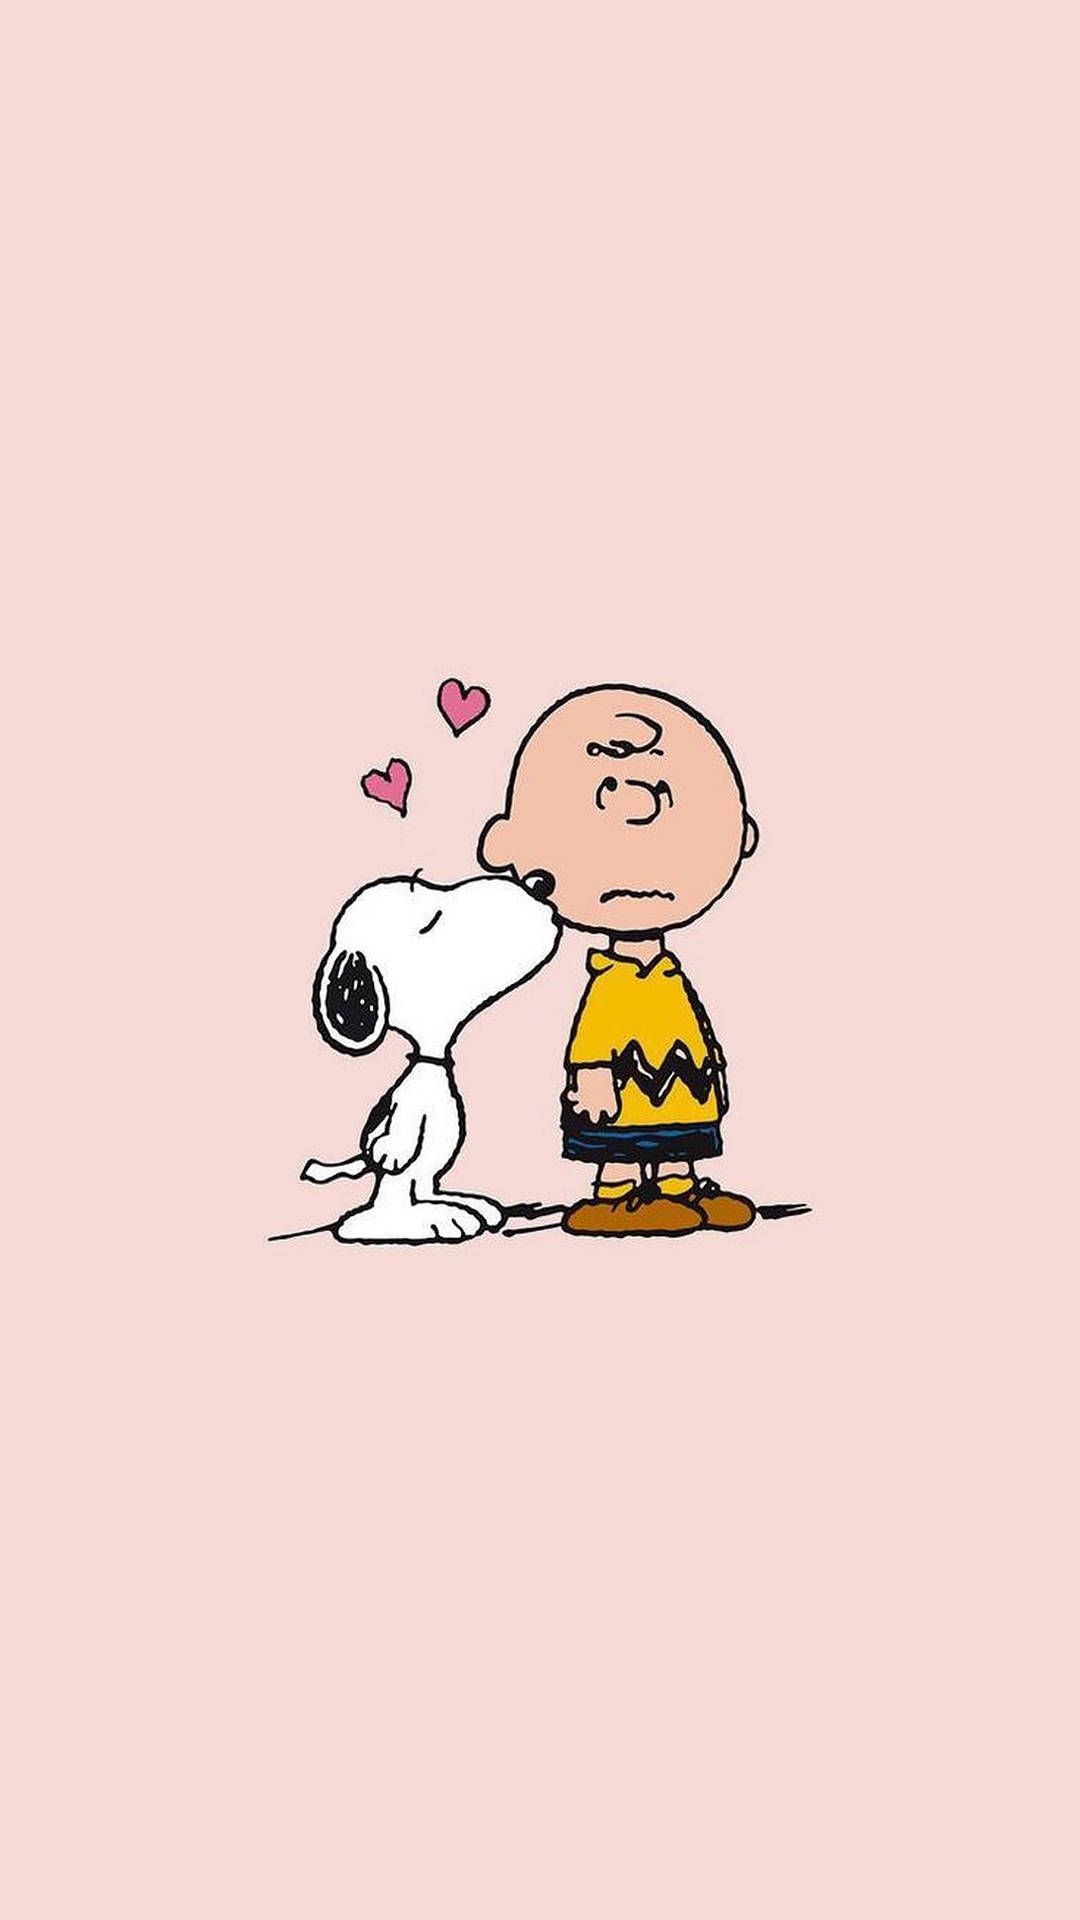 Free Charlie Brown Wallpaper Downloads, Charlie Brown Wallpaper for FREE